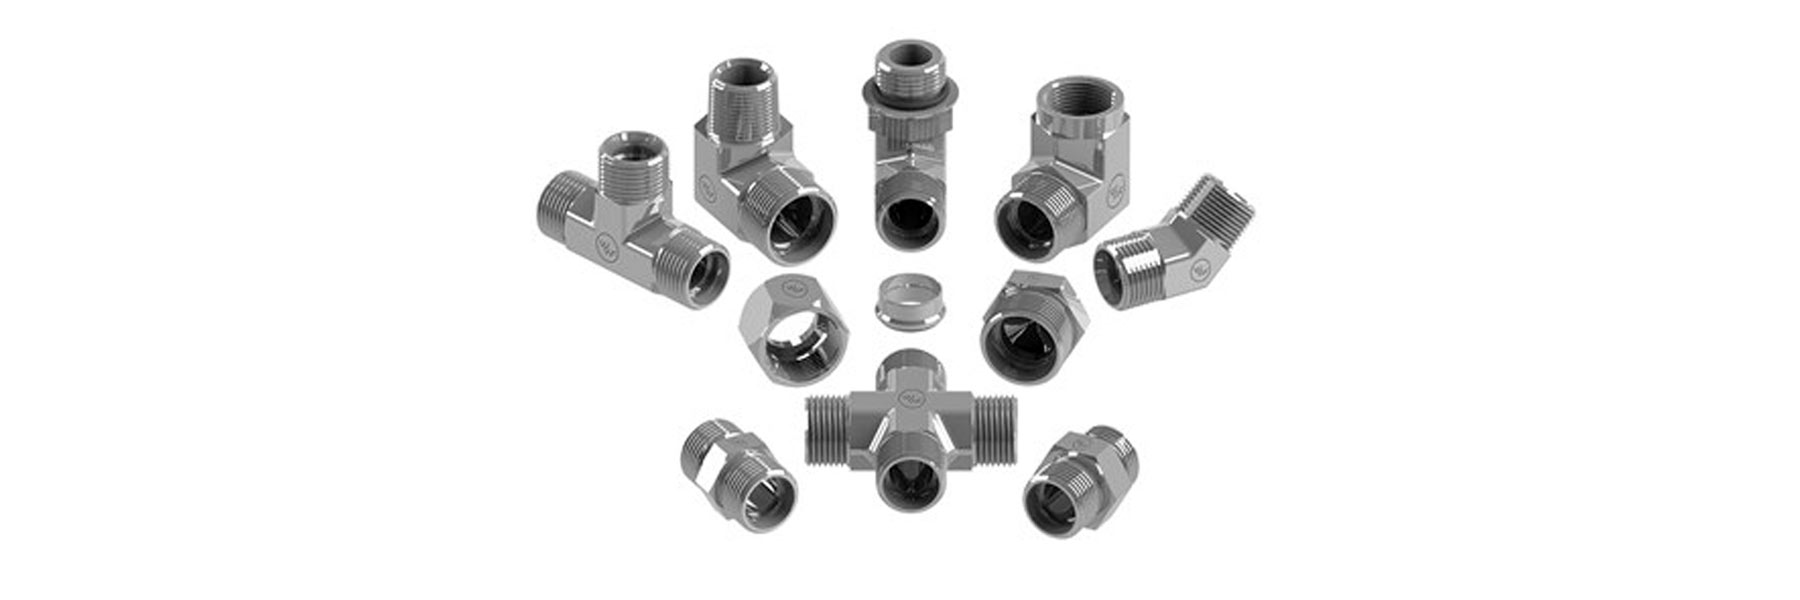 INCH COMPRESSION TUBE FITTINGS